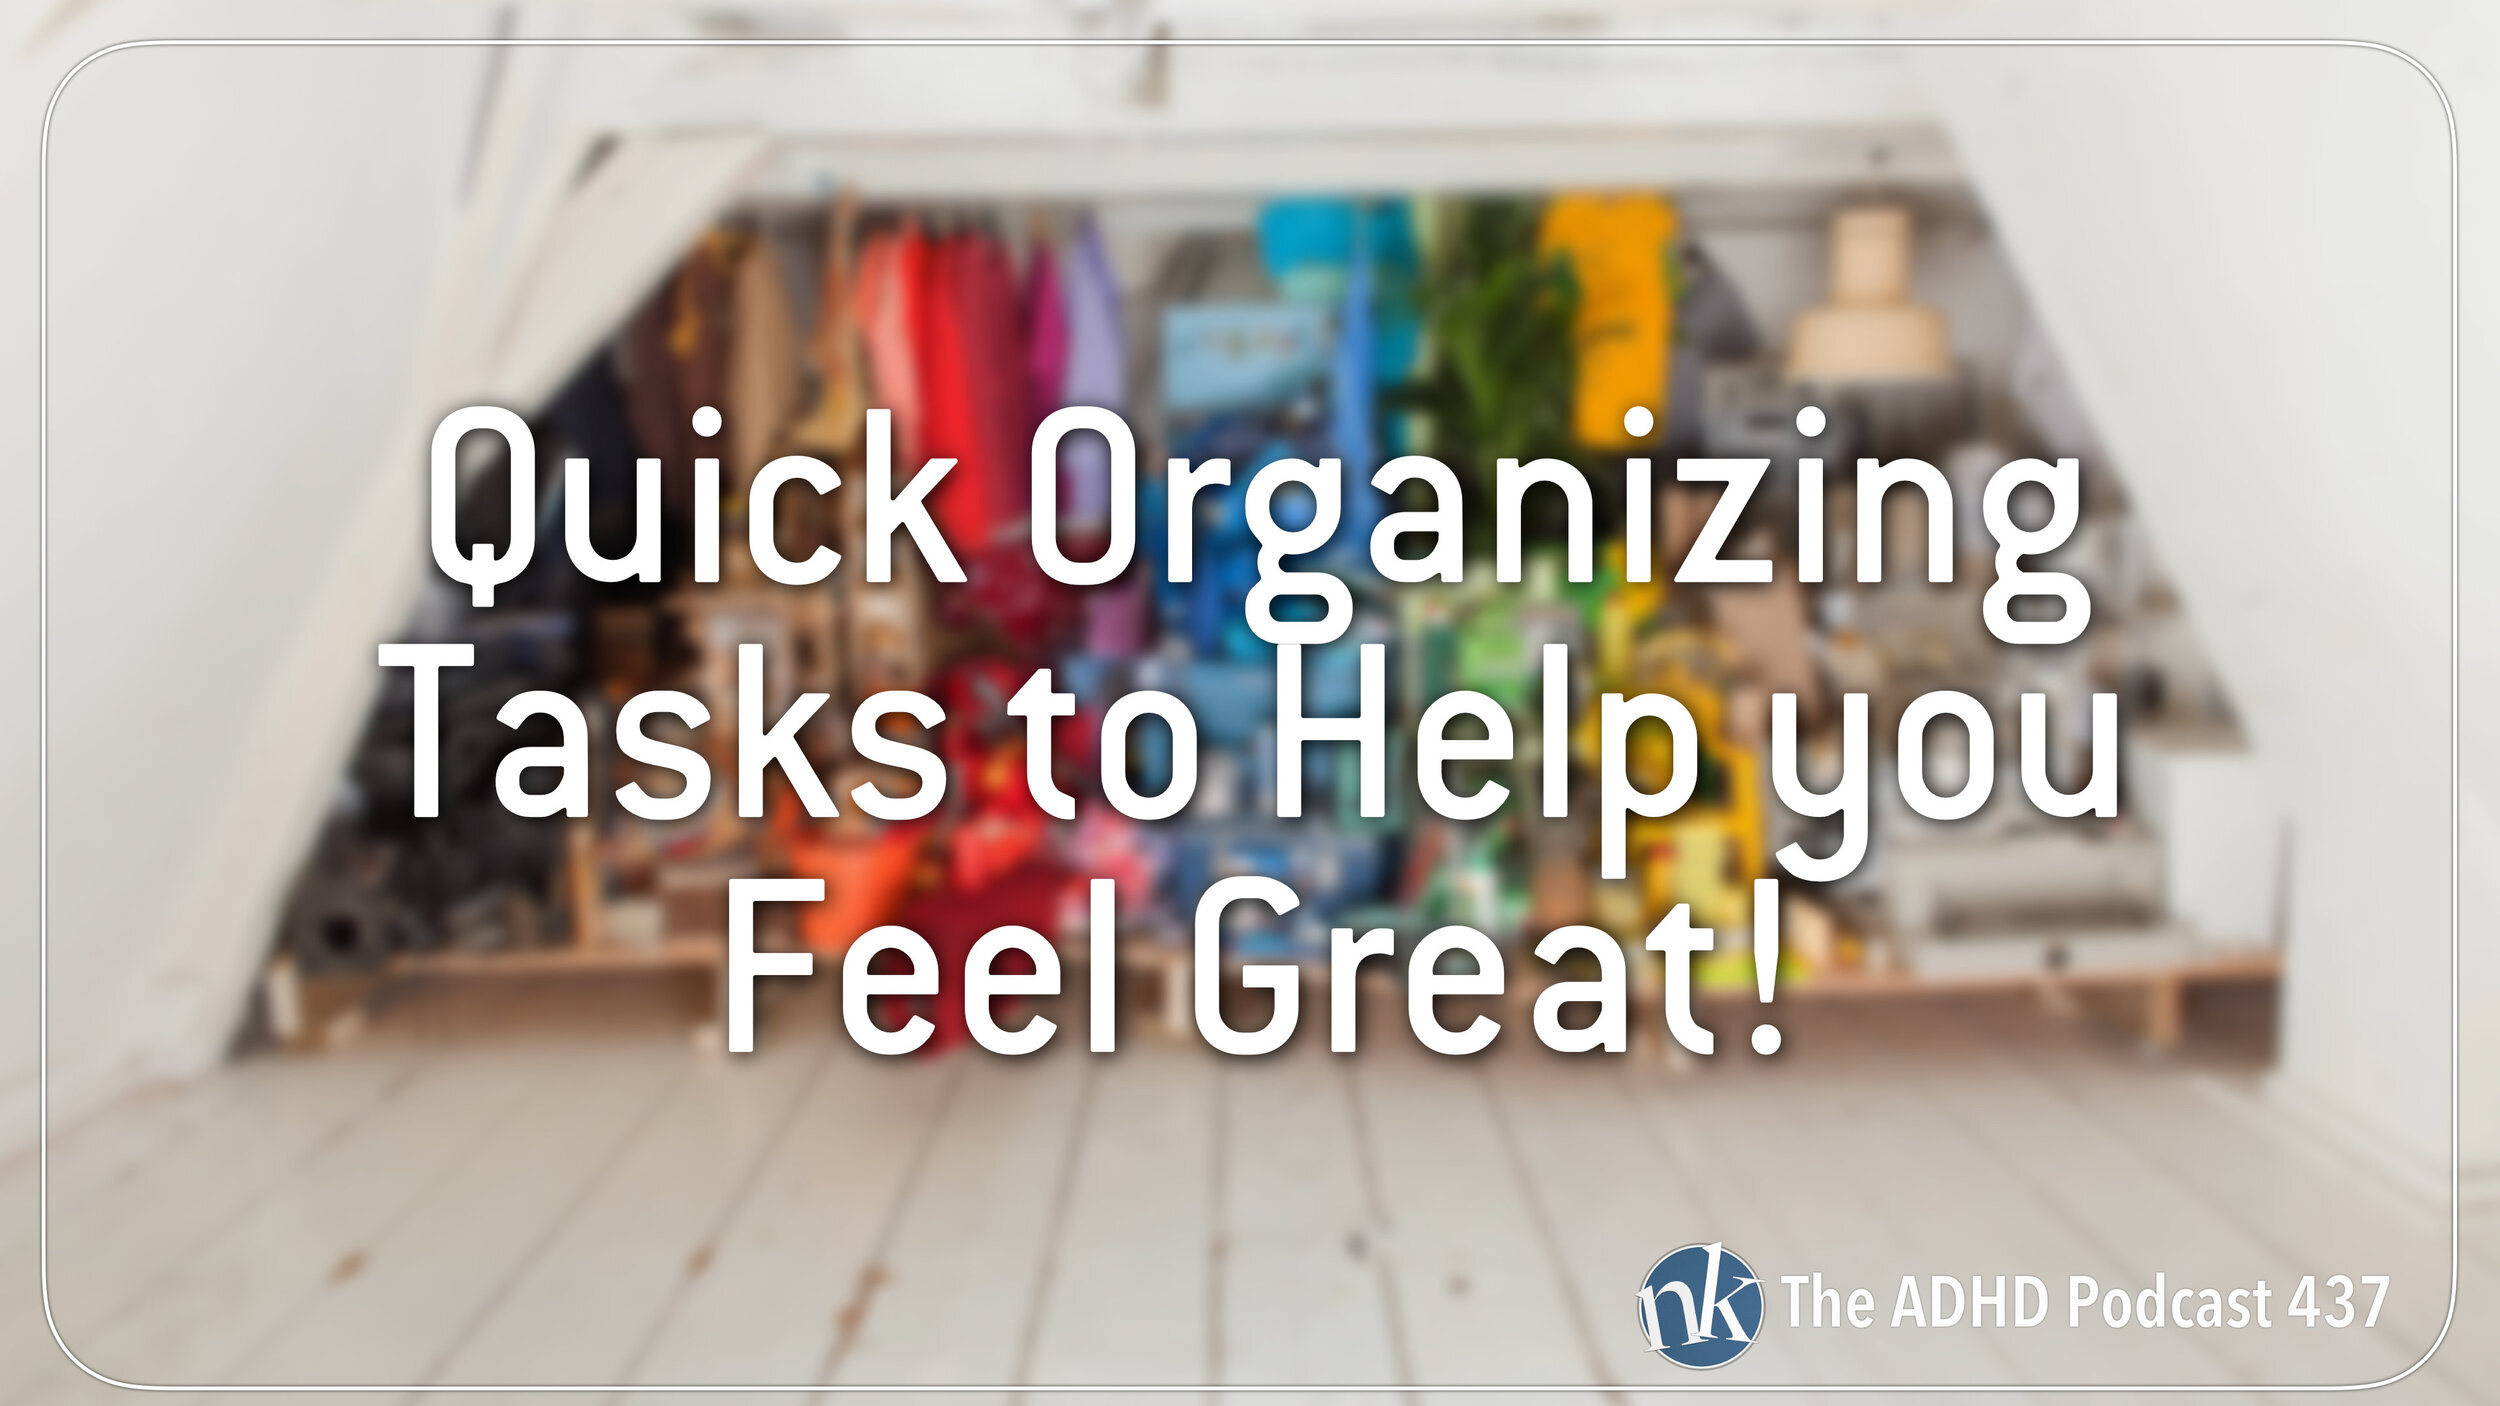 5 Tips for Organizing Your Clothes with ADHD